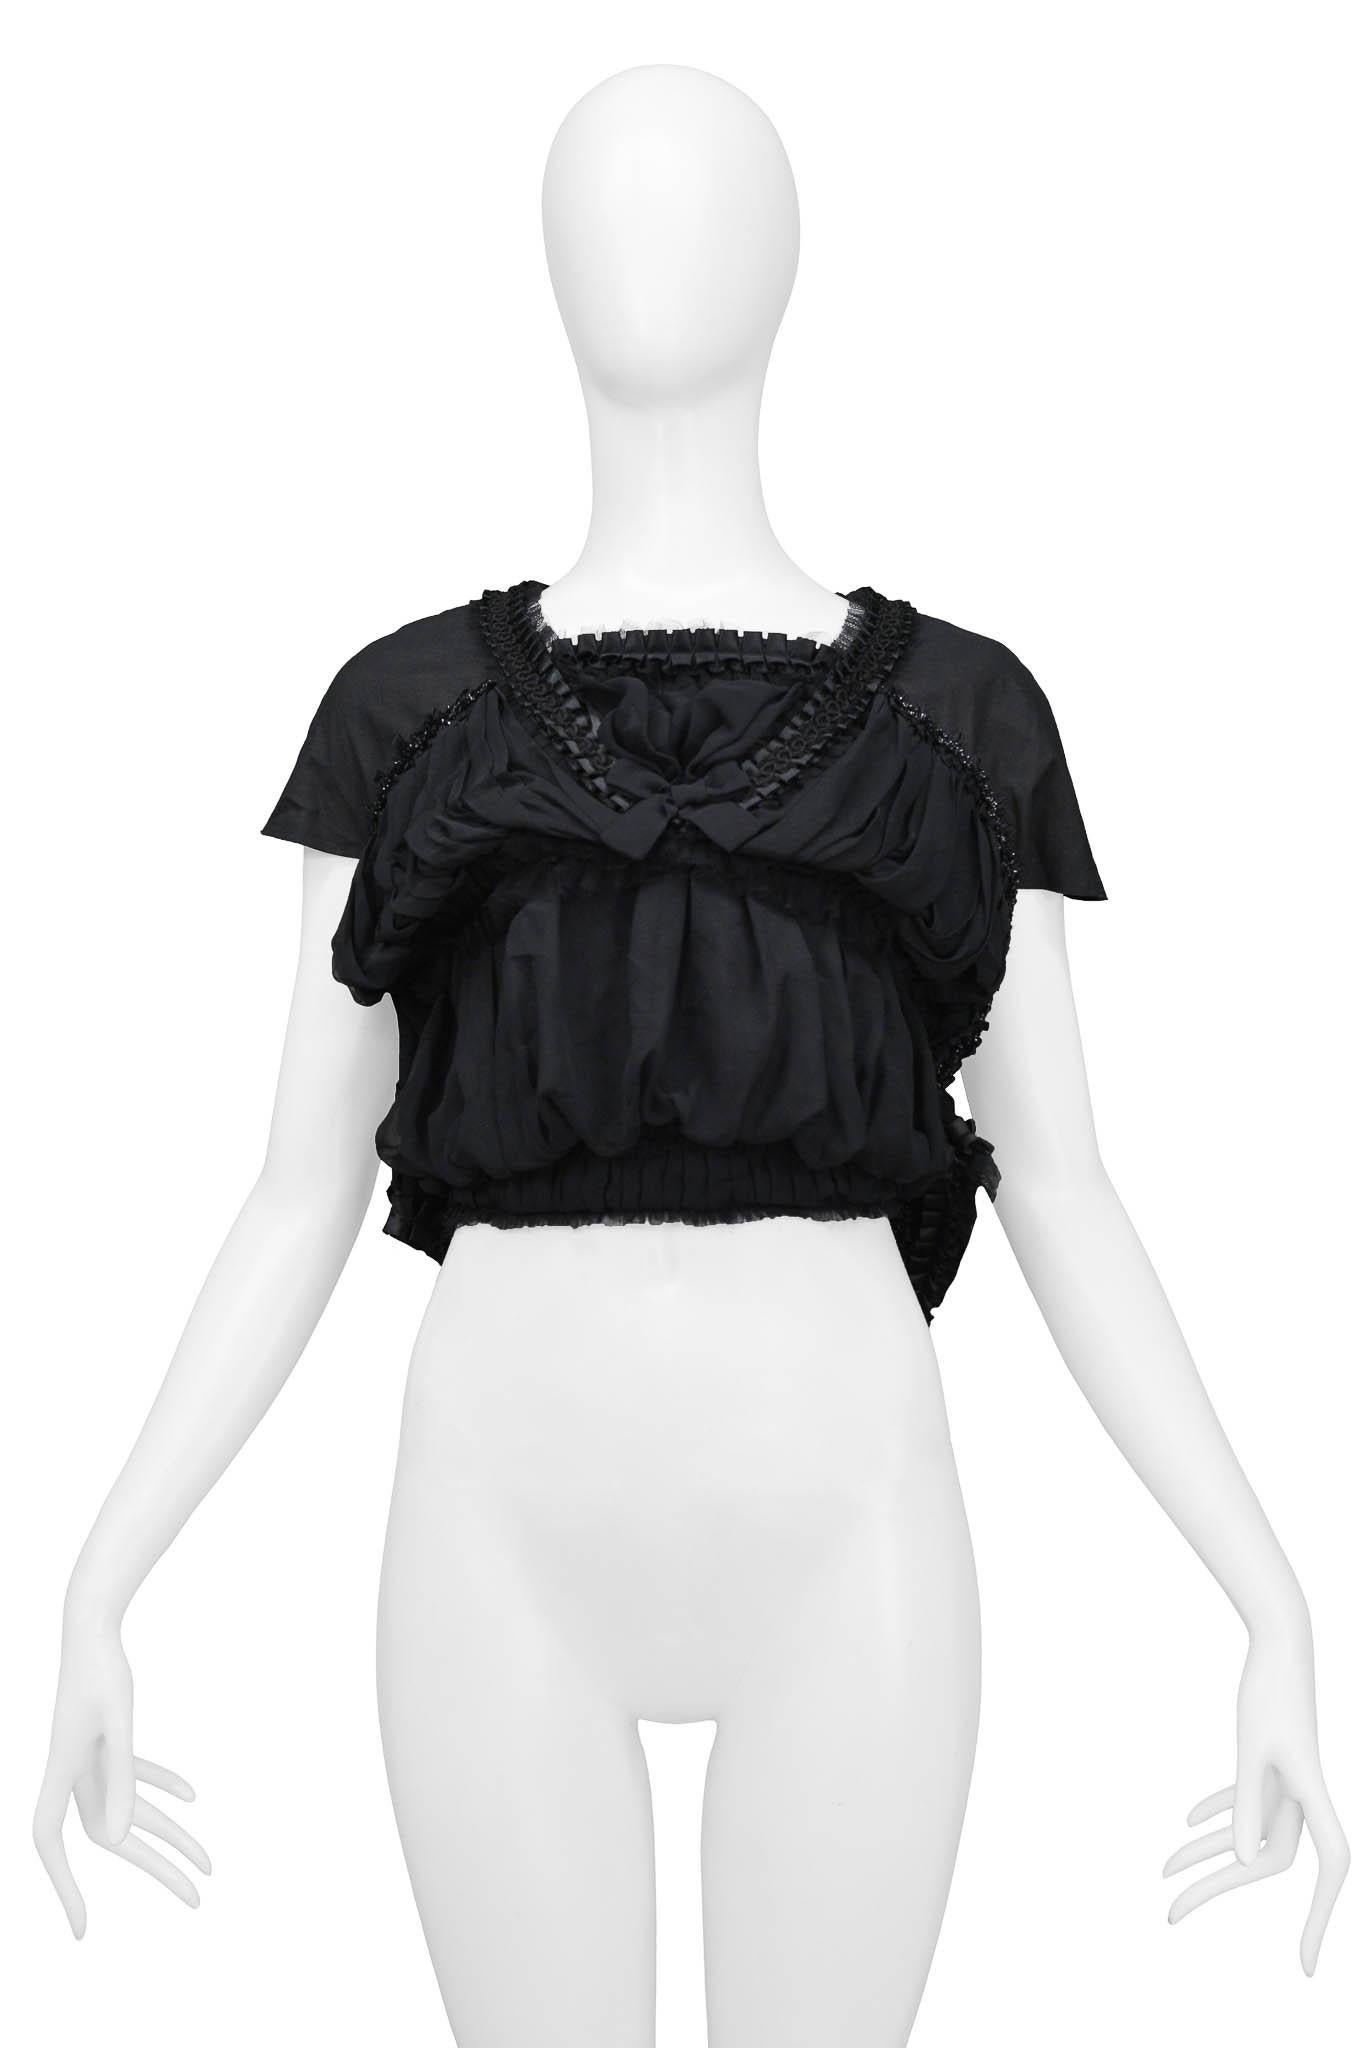 Vintage Comme des Garcons black short sleeve top featuring two rows of shirring creating a double blouson effect and pleated satin ribbon at neckline. Circa 2006.